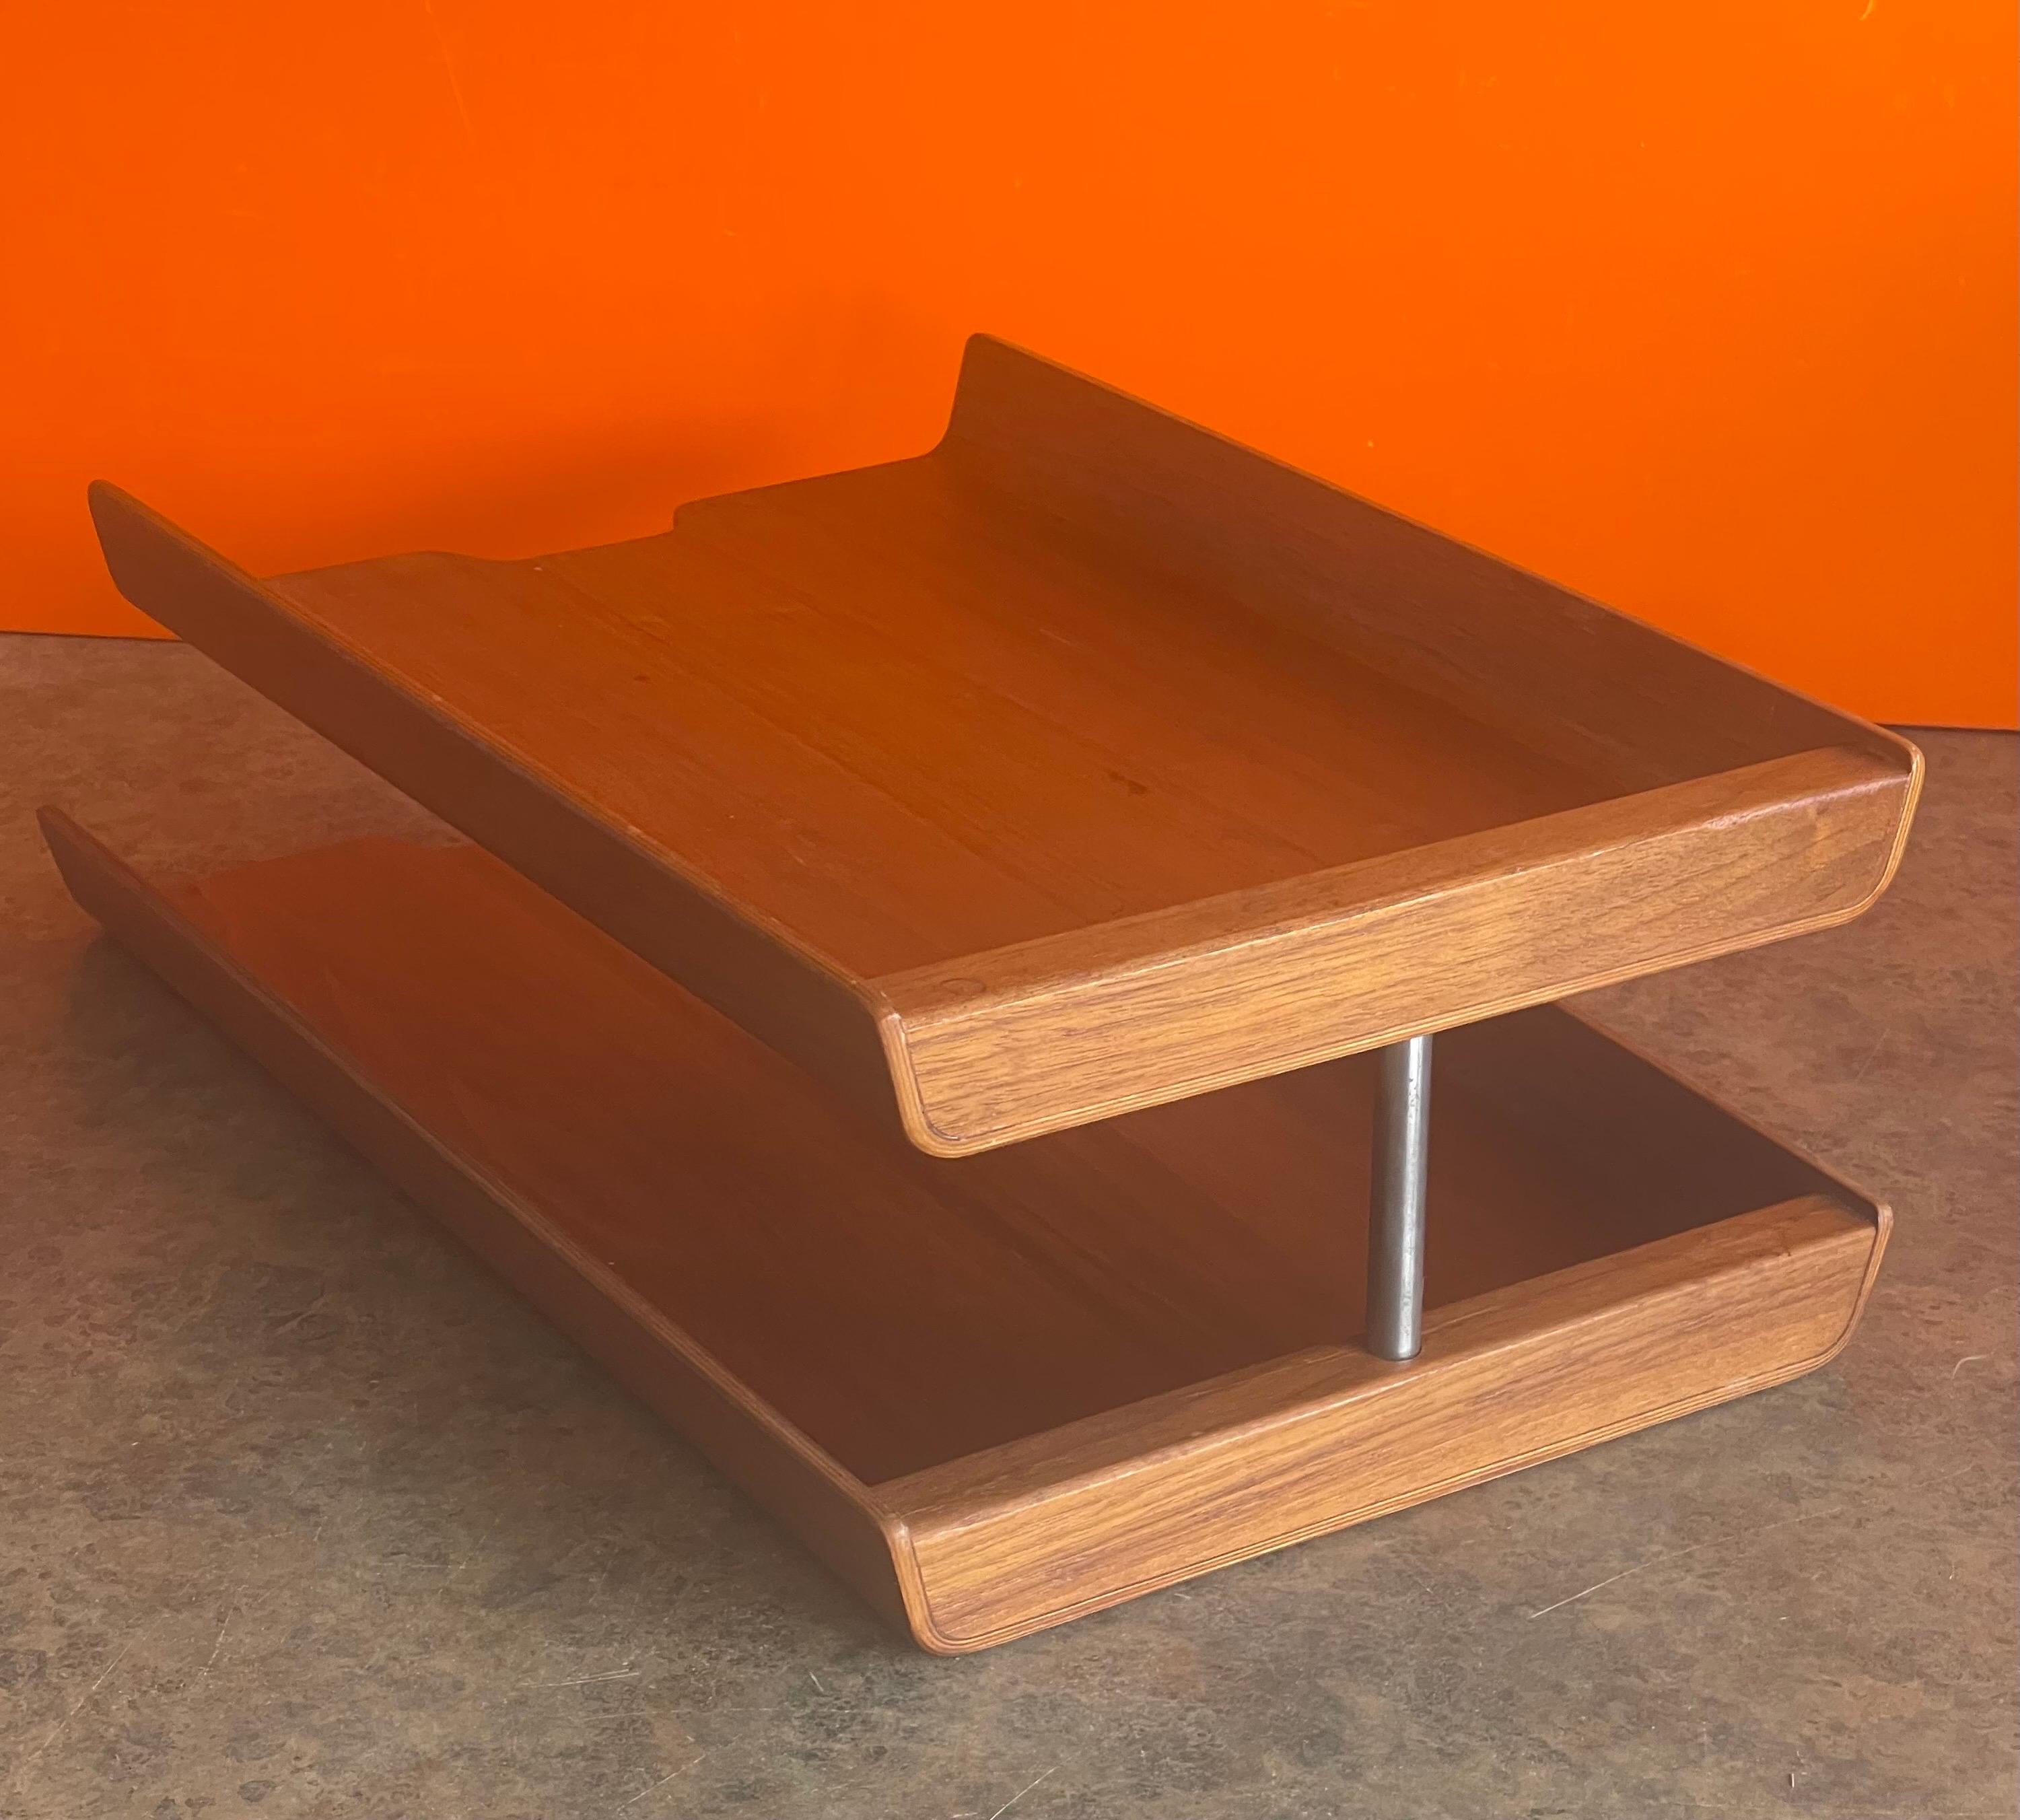 20th Century Molded Teak Plywood Double Letter Tray by Martin Aberg for Rainbow of Sweden